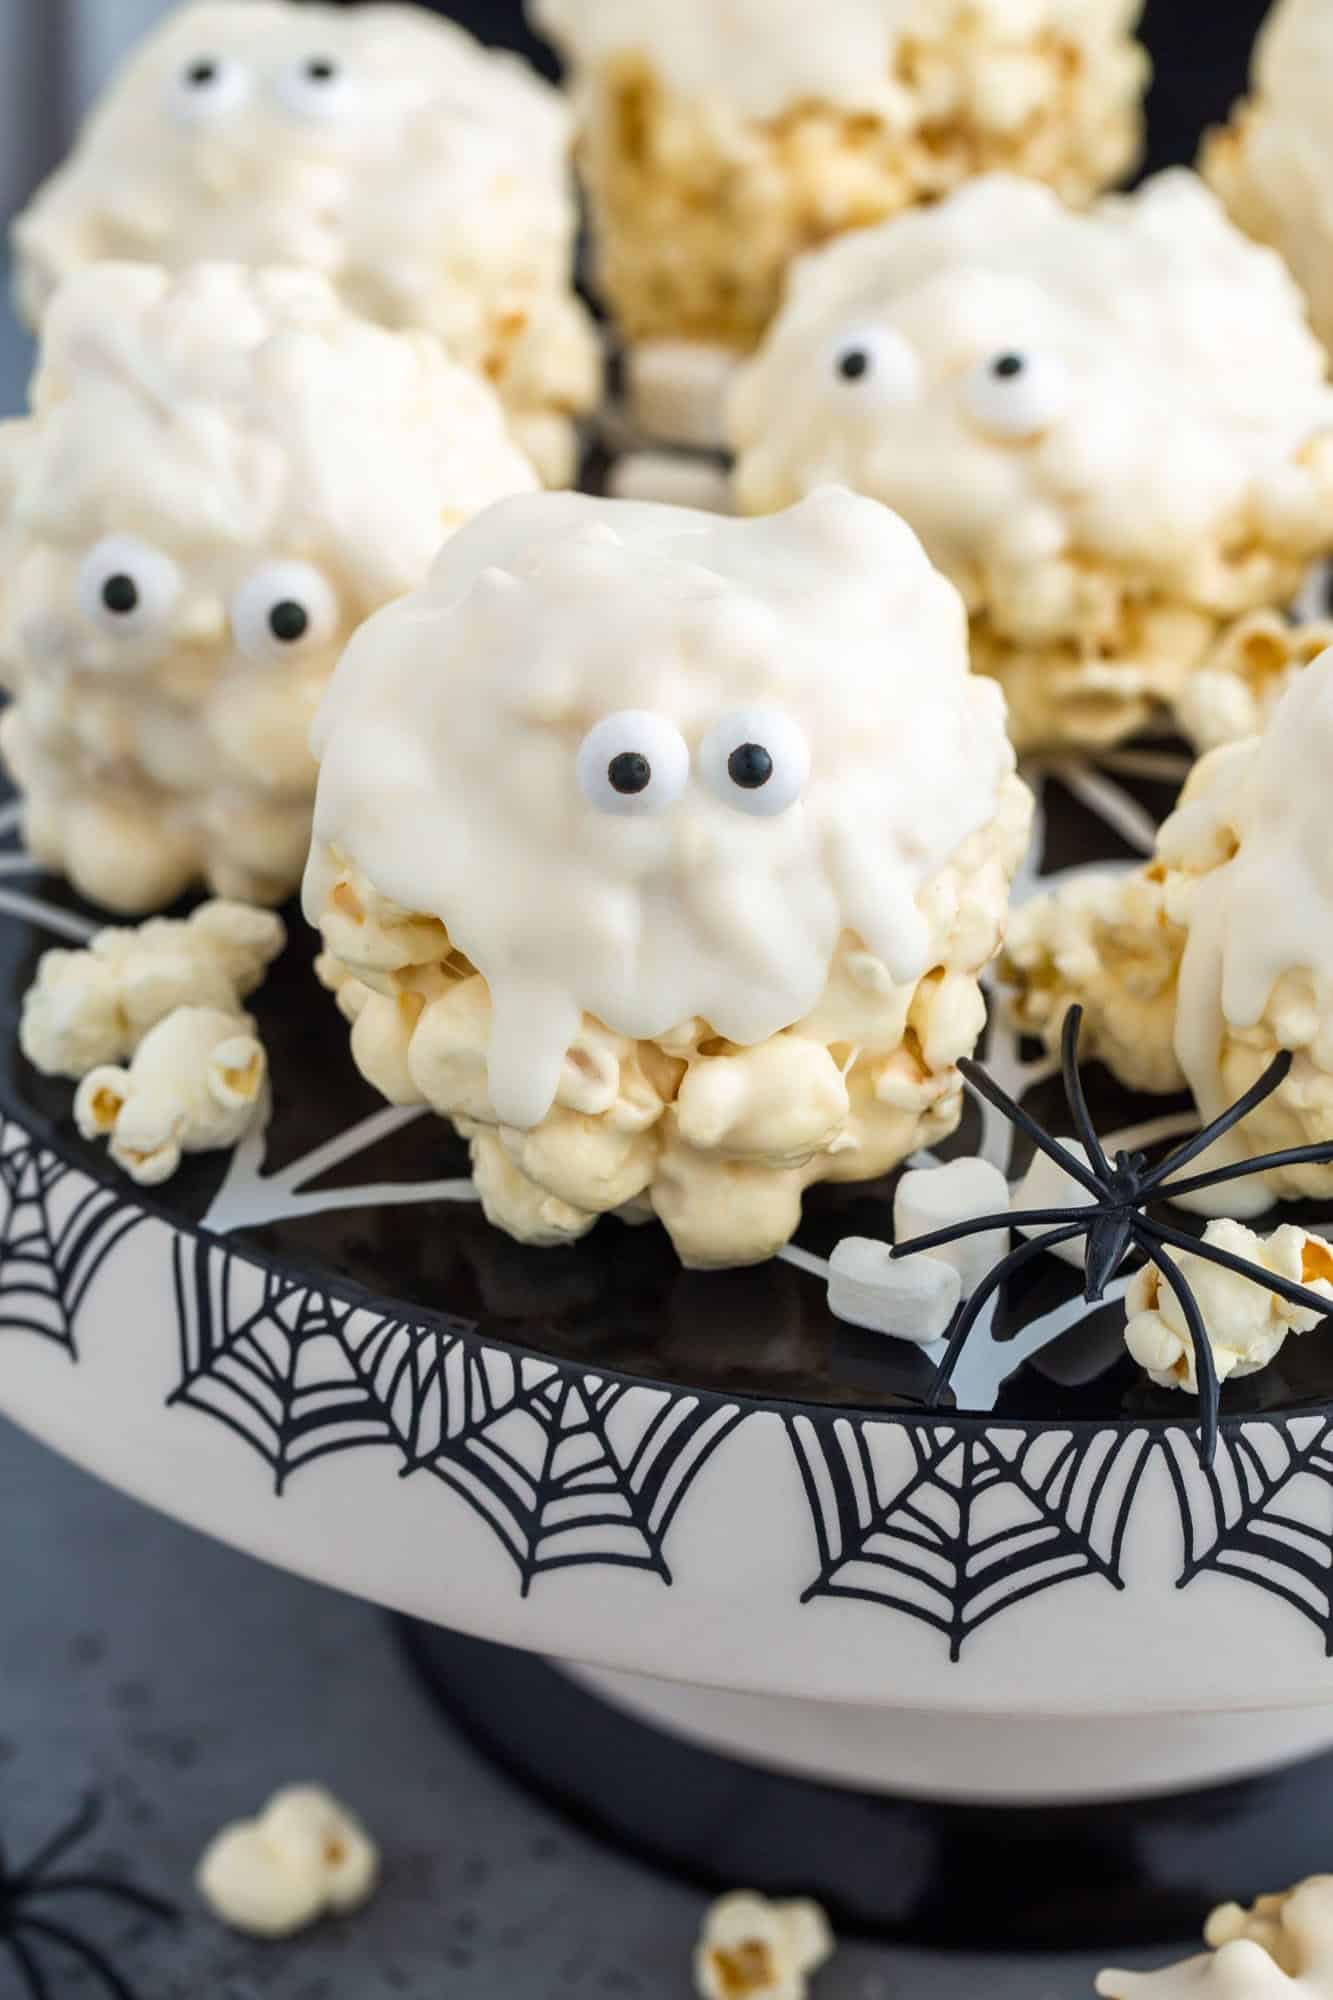 popcorn balls that look like halloween ghosts, on a black and white cake stand decorated with spider webs